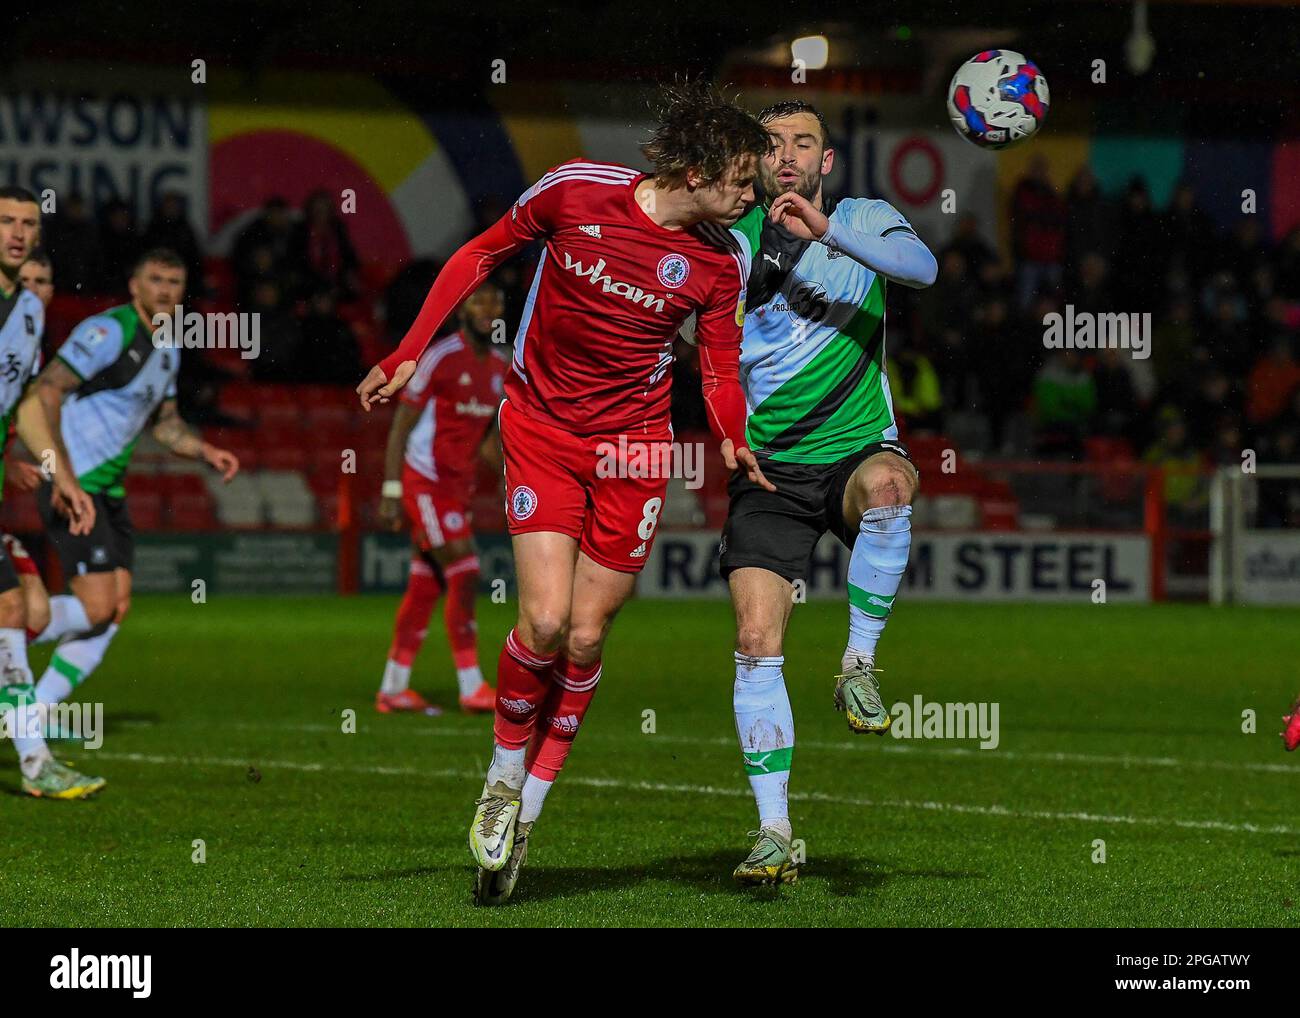 Matt Butcher#7 of Plymouth Argyle battles for the ball during the Sky Bet League 1 match Accrington Stanley vs Plymouth Argyle at Wham Stadium, Accrington, United Kingdom, 21st March 2023  (Photo by Stan Kasala/News Images) Stock Photo